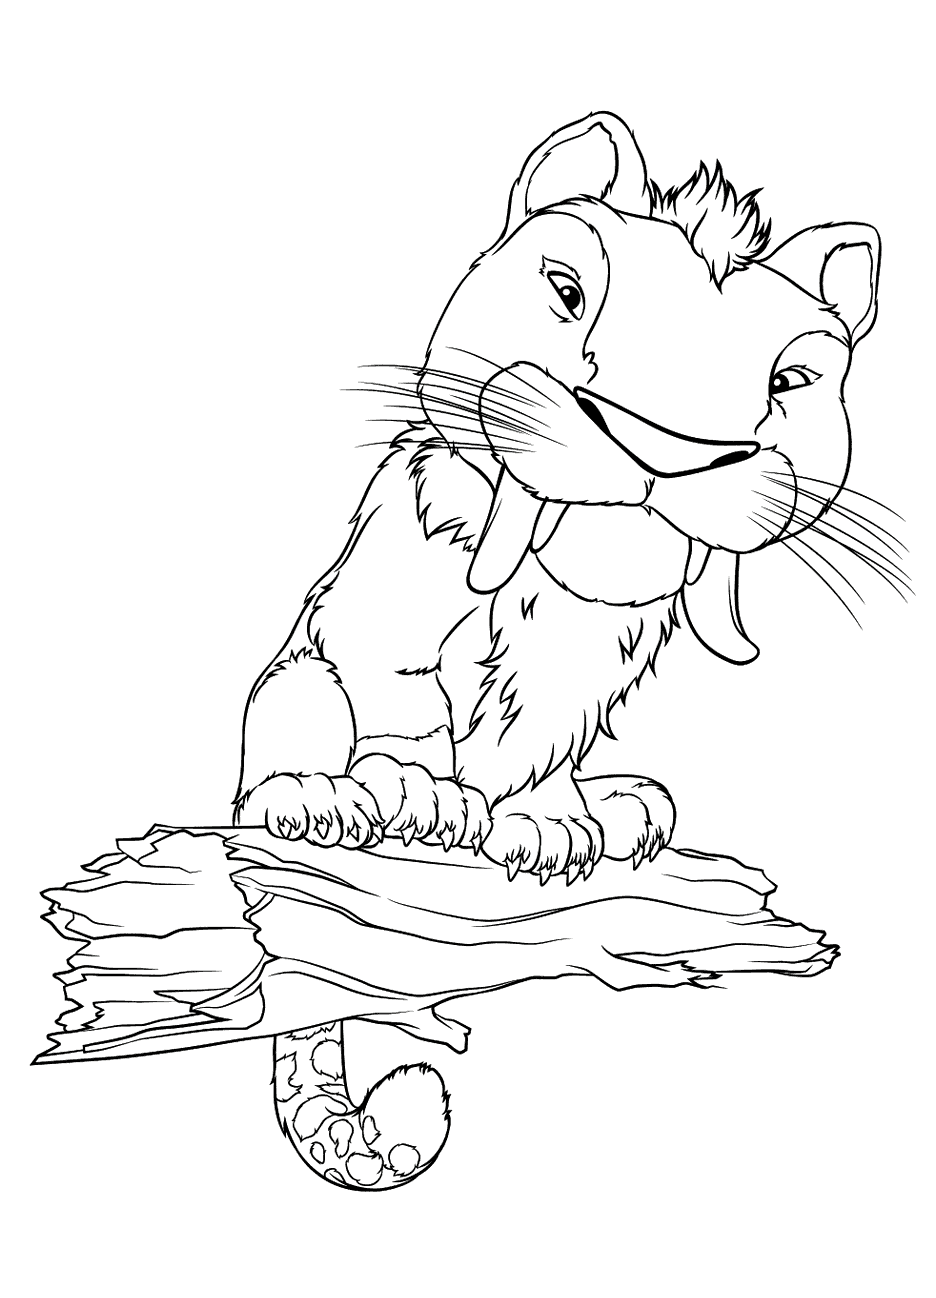 The Croods coloring pages to download and print for free